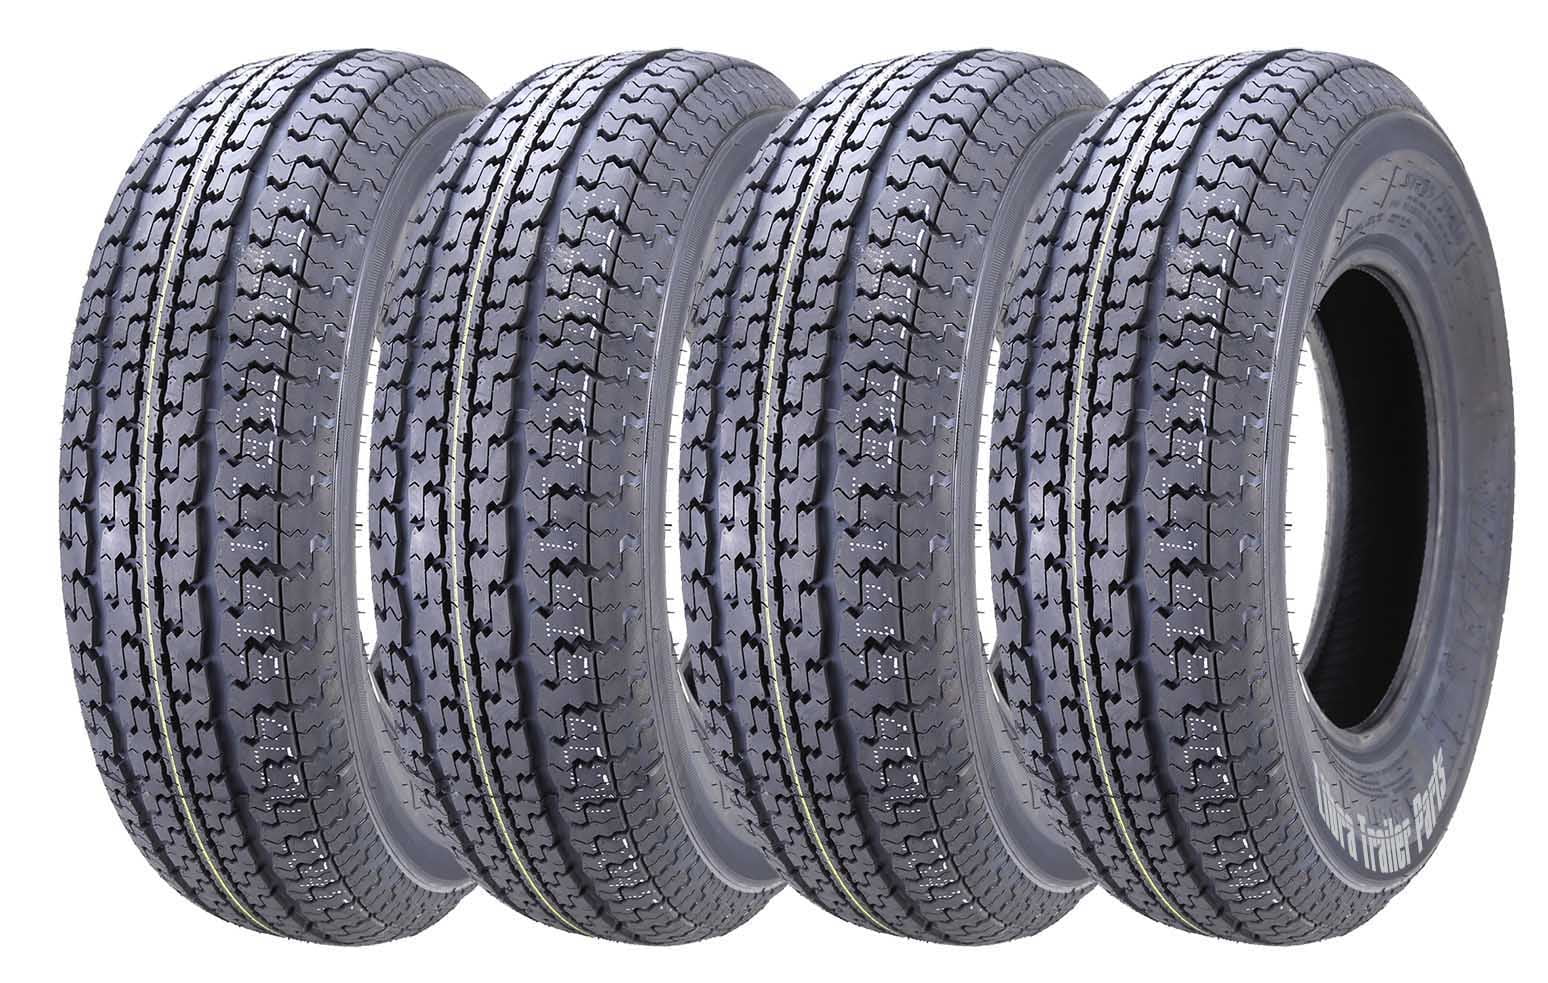 Arrives by Tue, May 3 Buy Set 4 Premium WINDA Trailer Tires ST 205/75R14 8P...